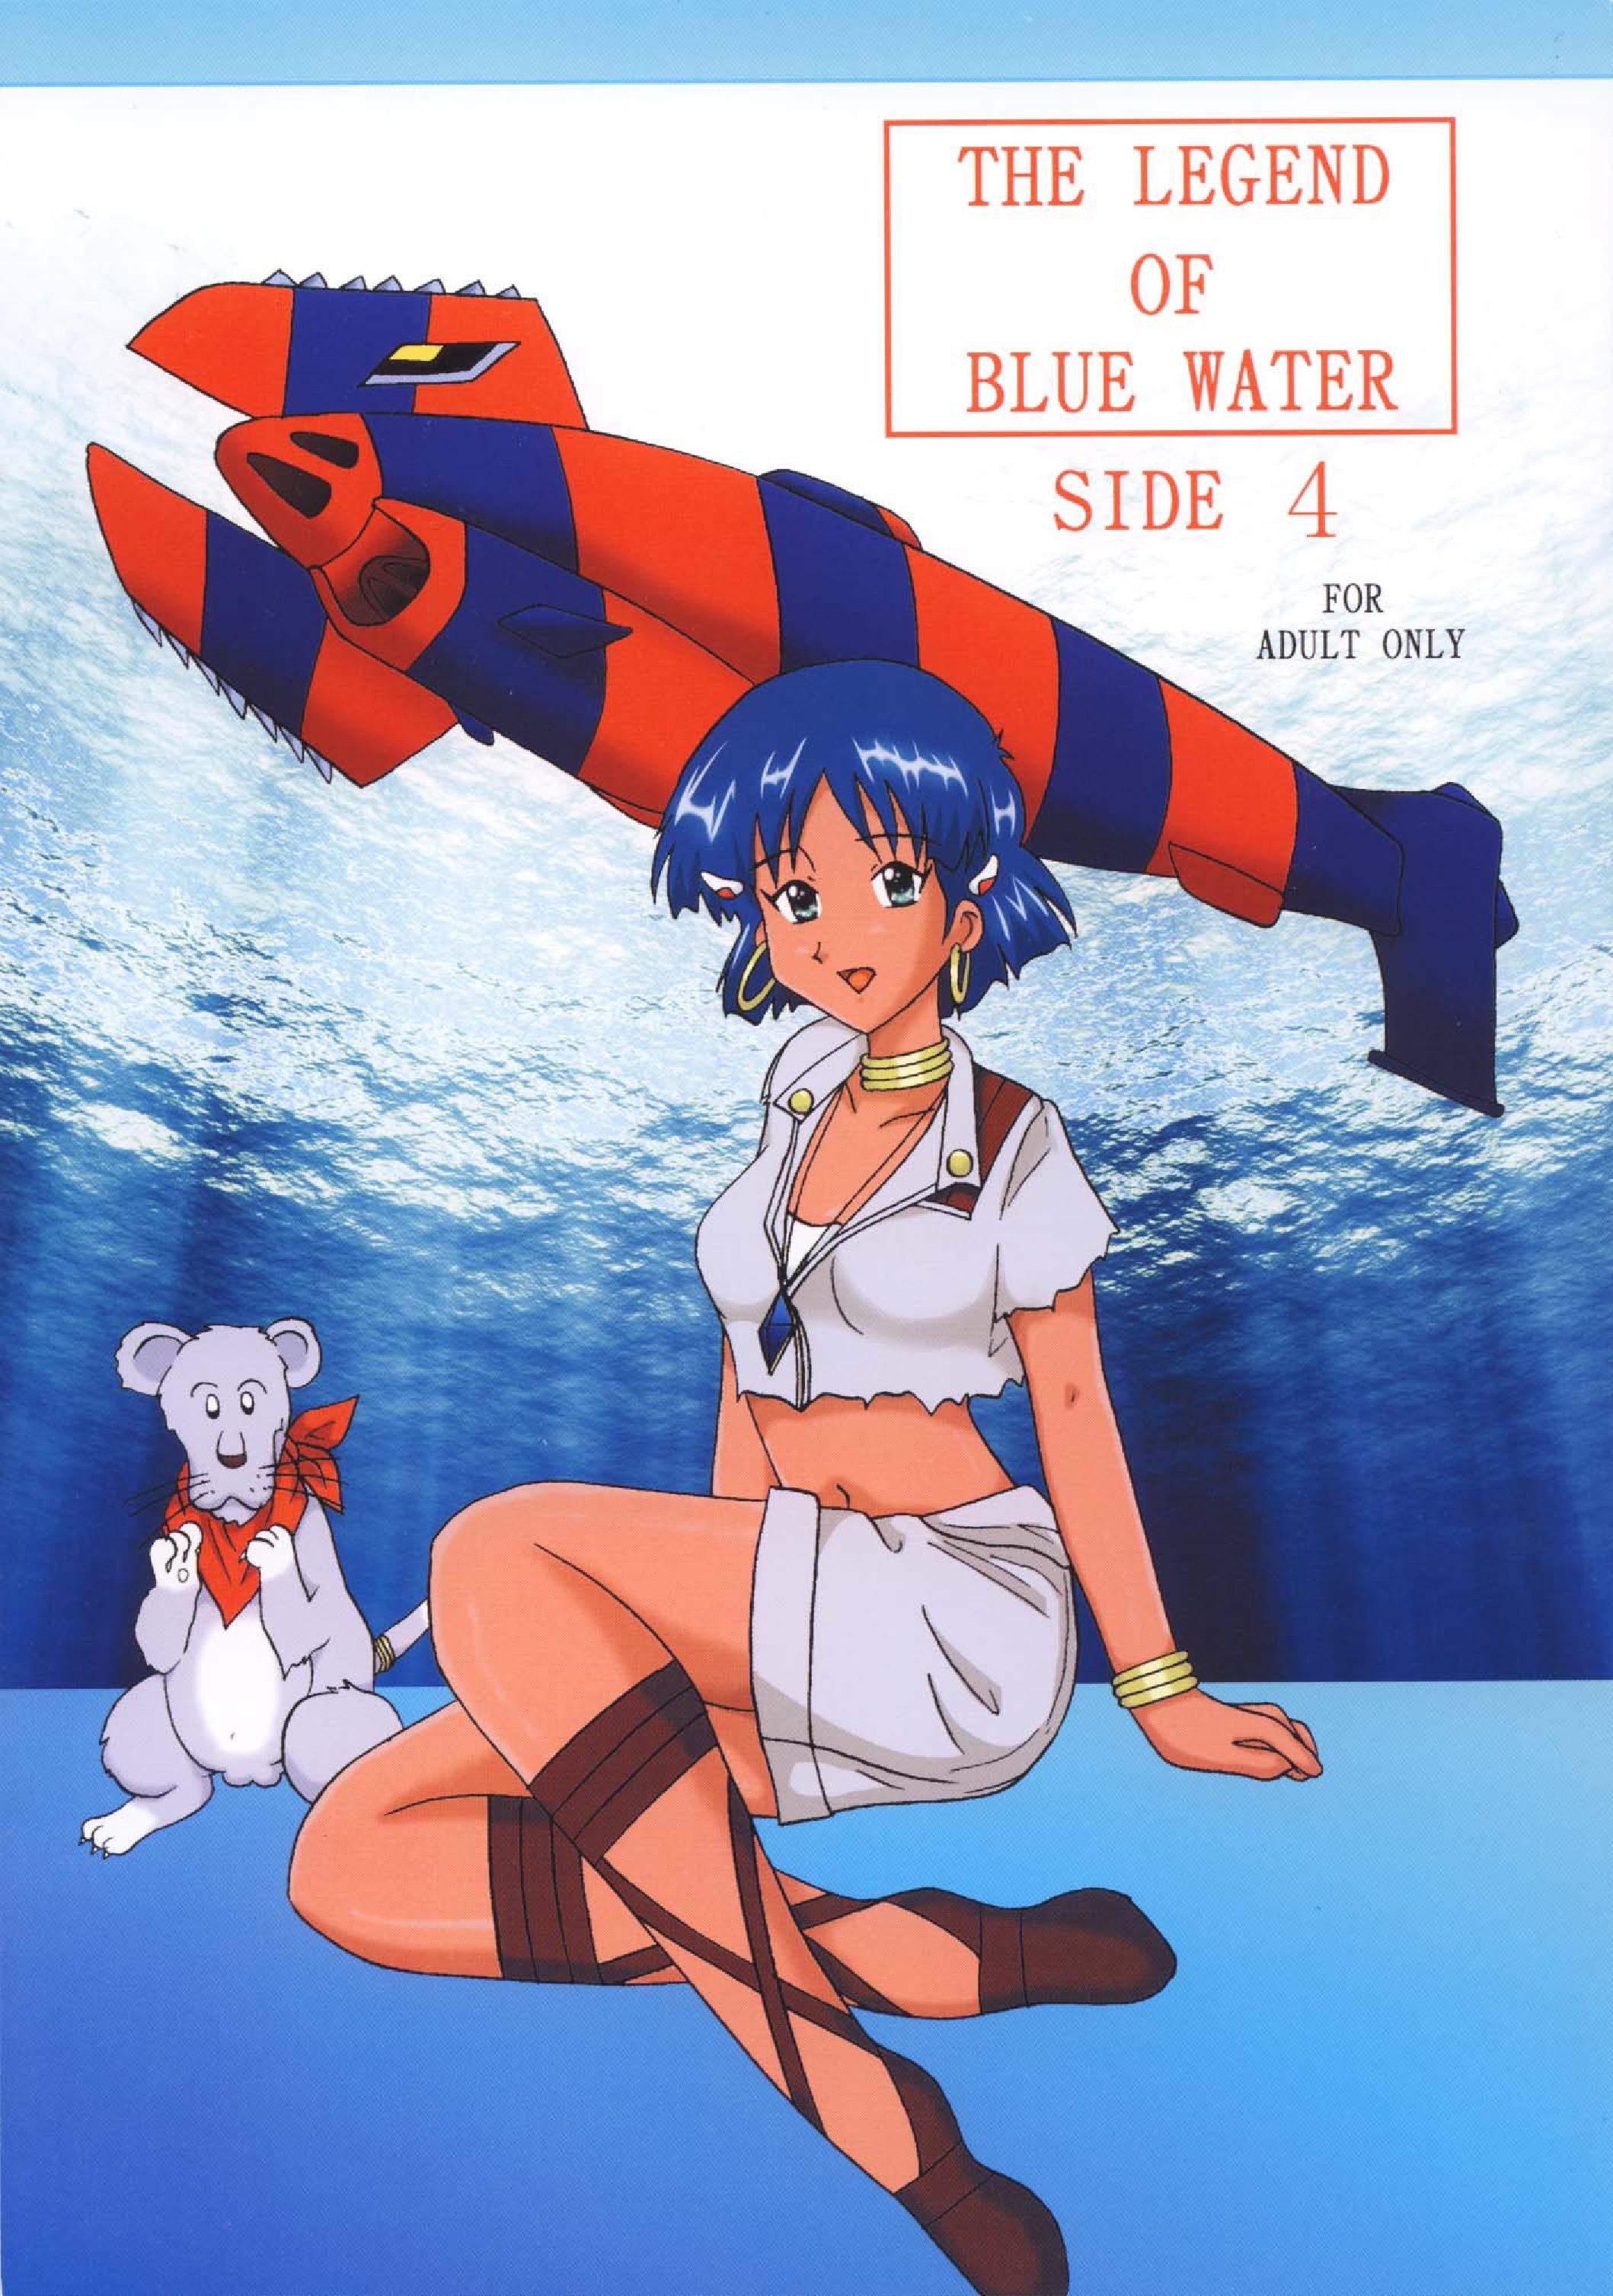 THE LEGEND OF BLUE WATER SIDE 4 0